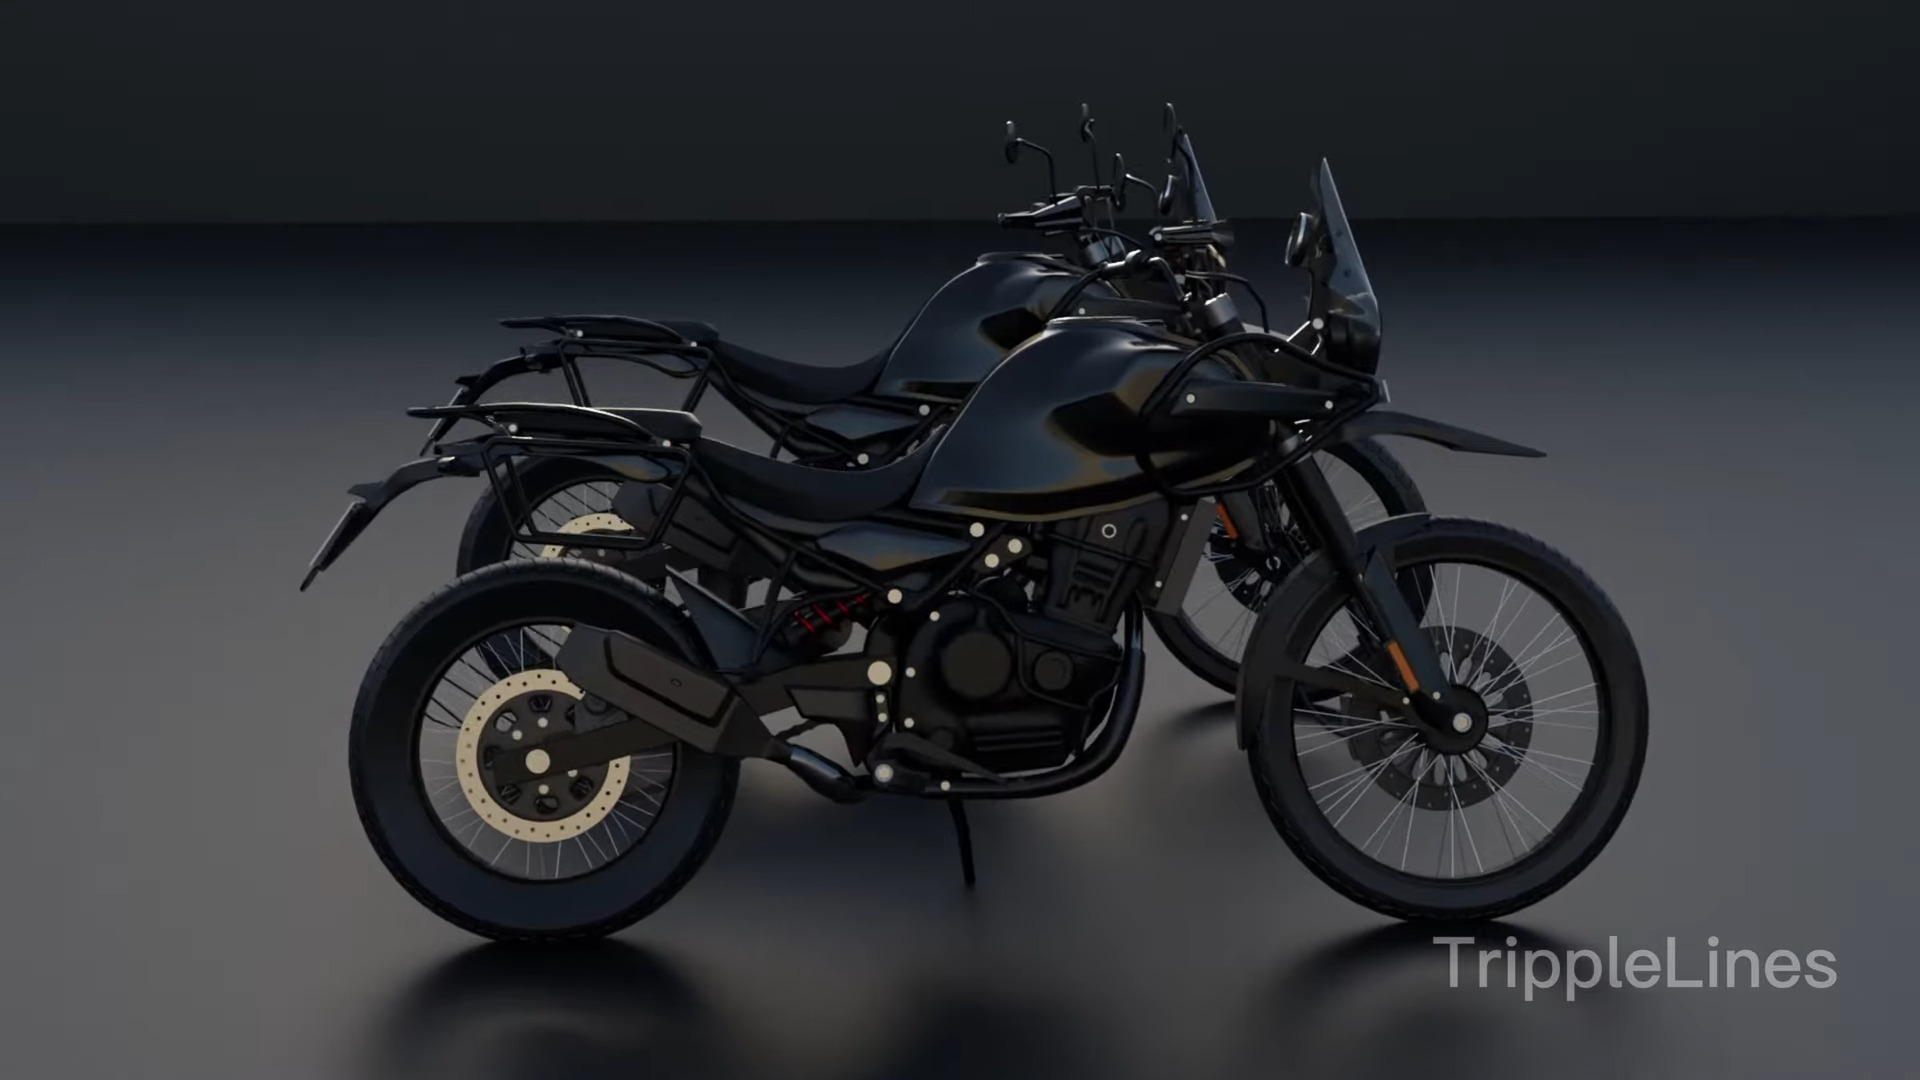 Royal Enfield Himalayan 450 Design Fully Revealed Via 3D Renderings - photograph